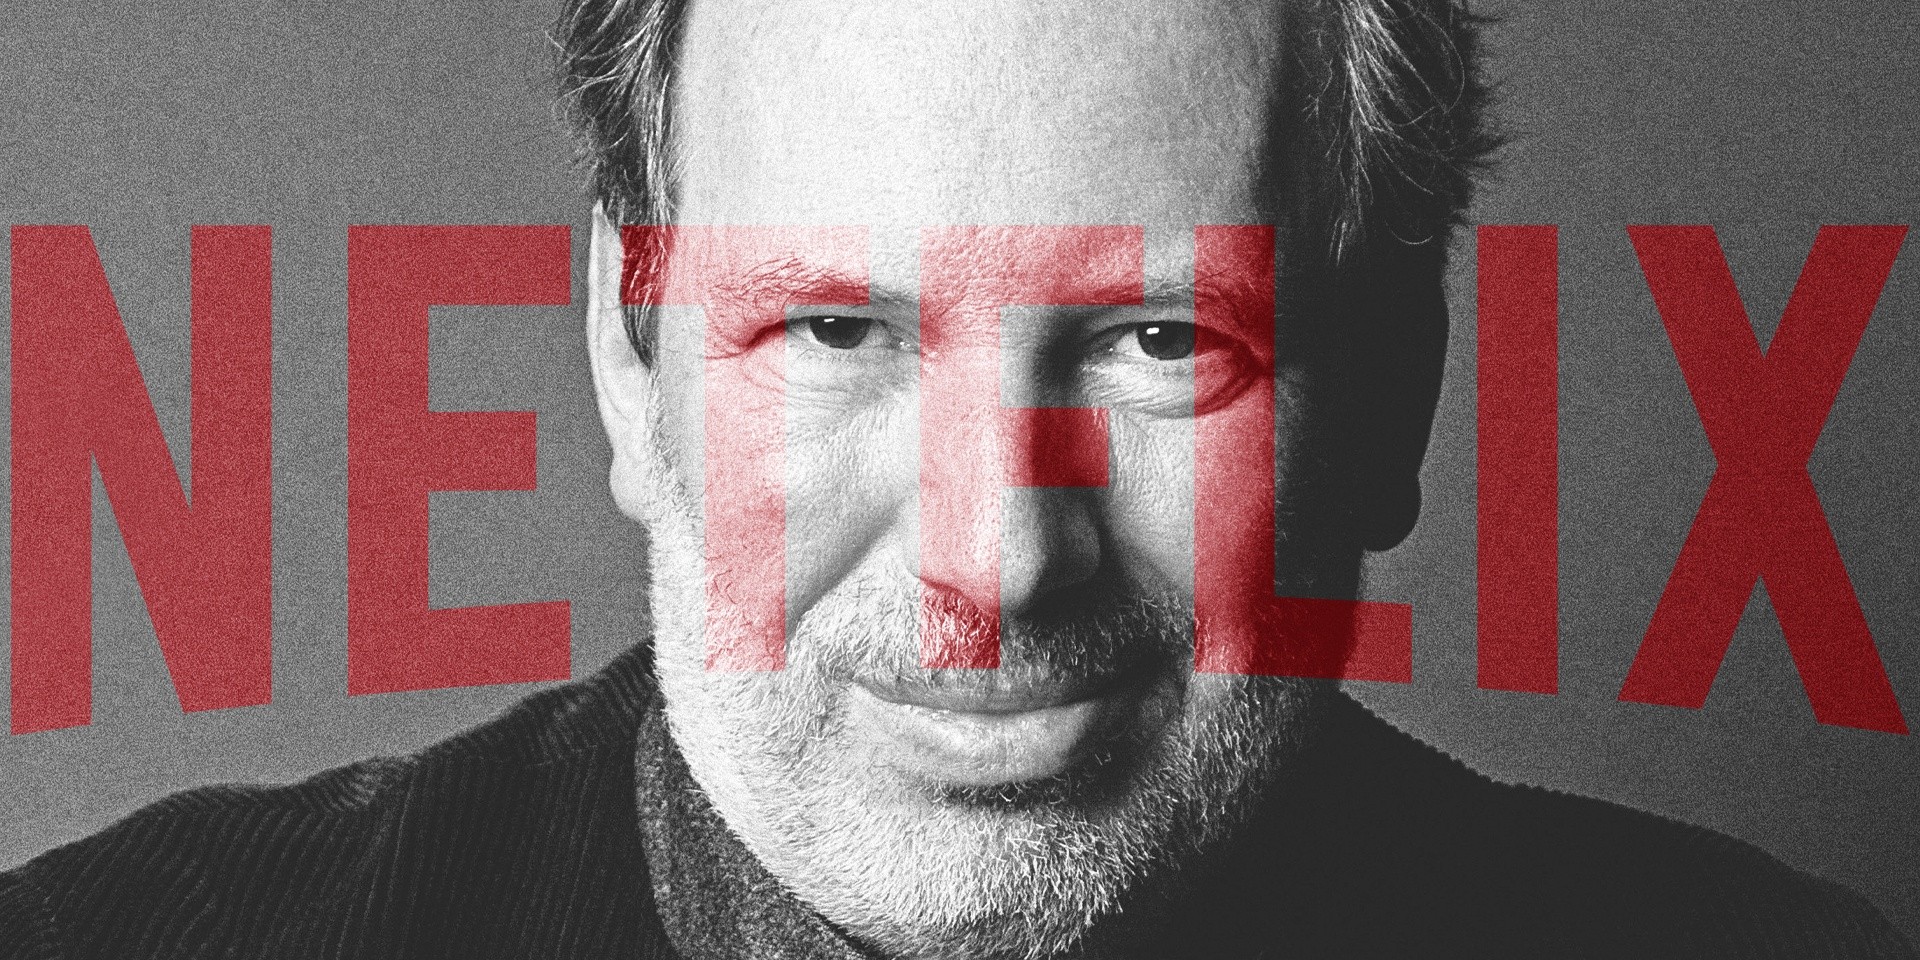 Hans Zimmer takes the iconic Netflix "ta-dum" to the next level